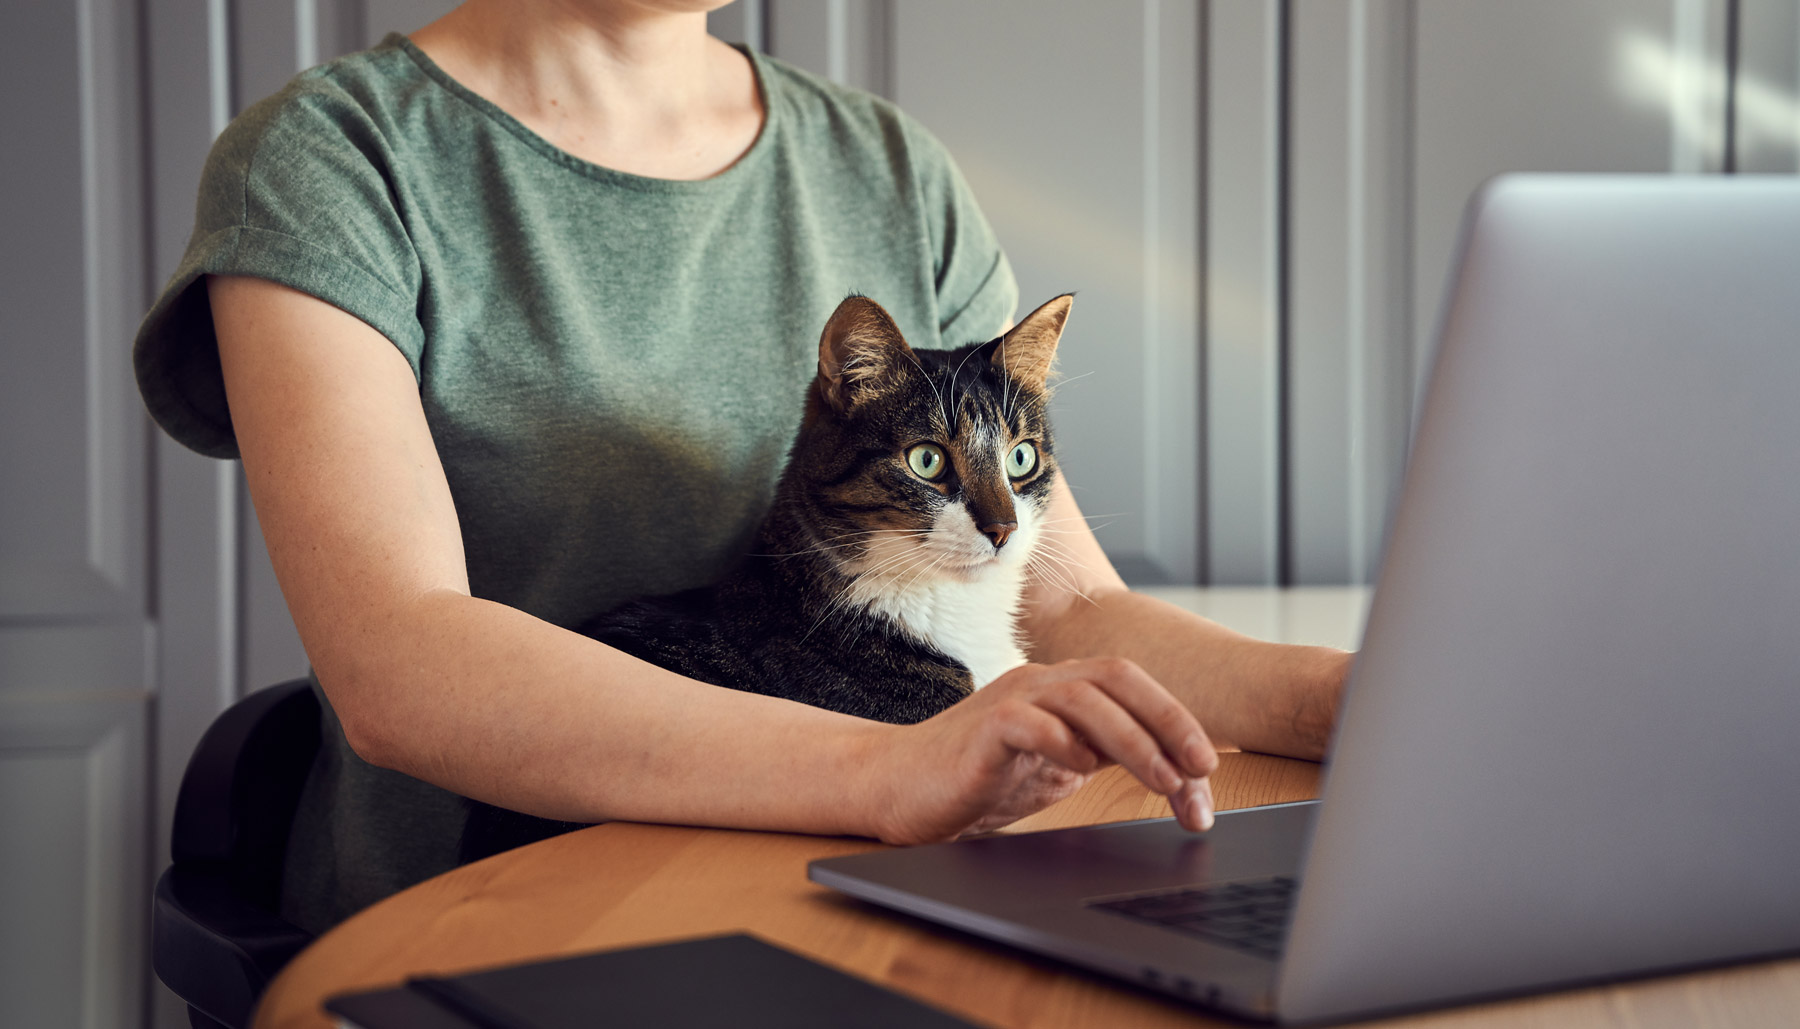 Girl working from home with cat in her lap